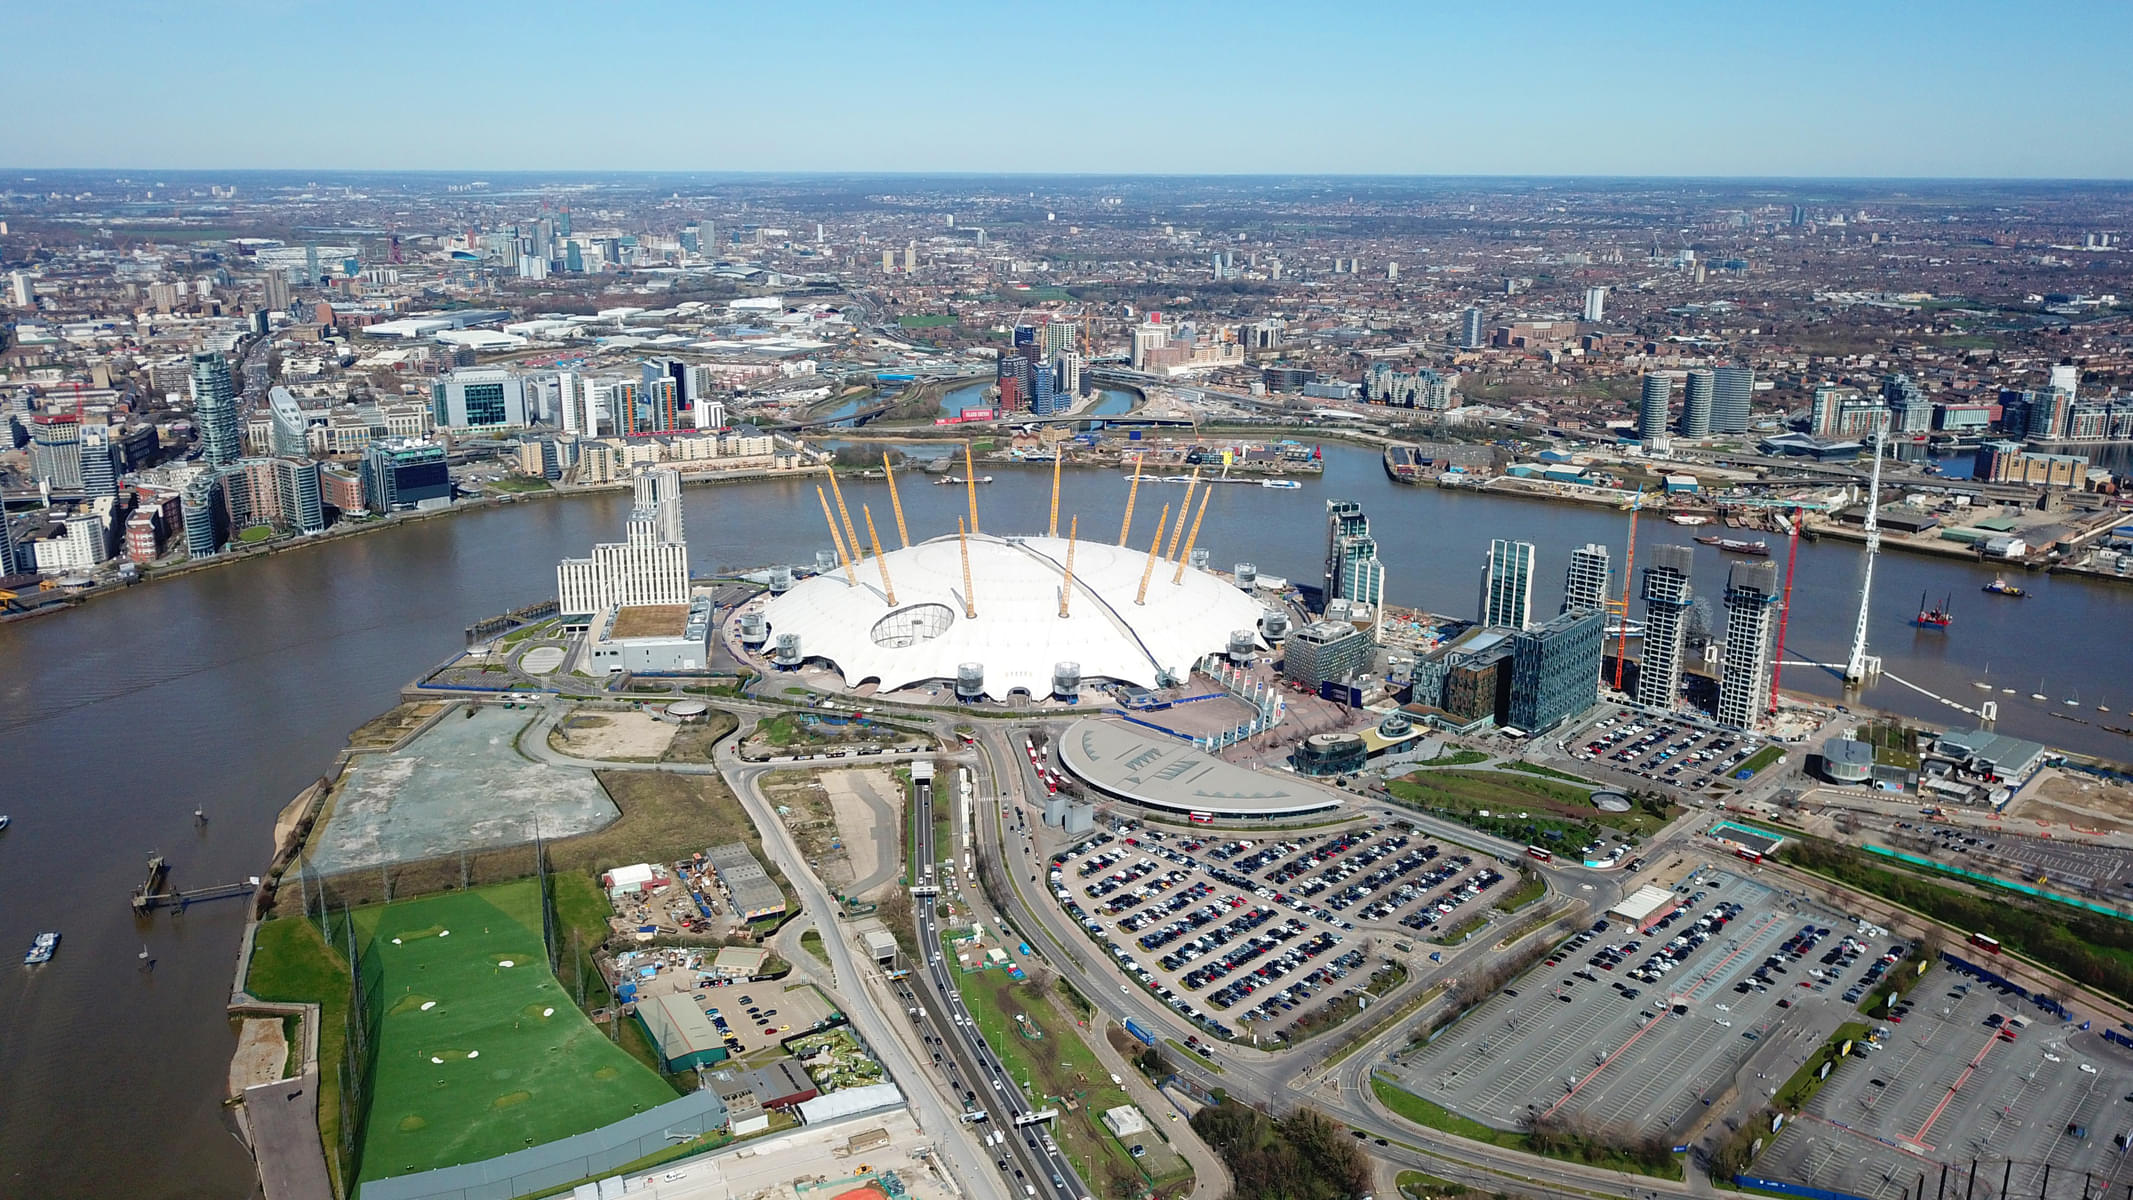 See the O2 Arena from above